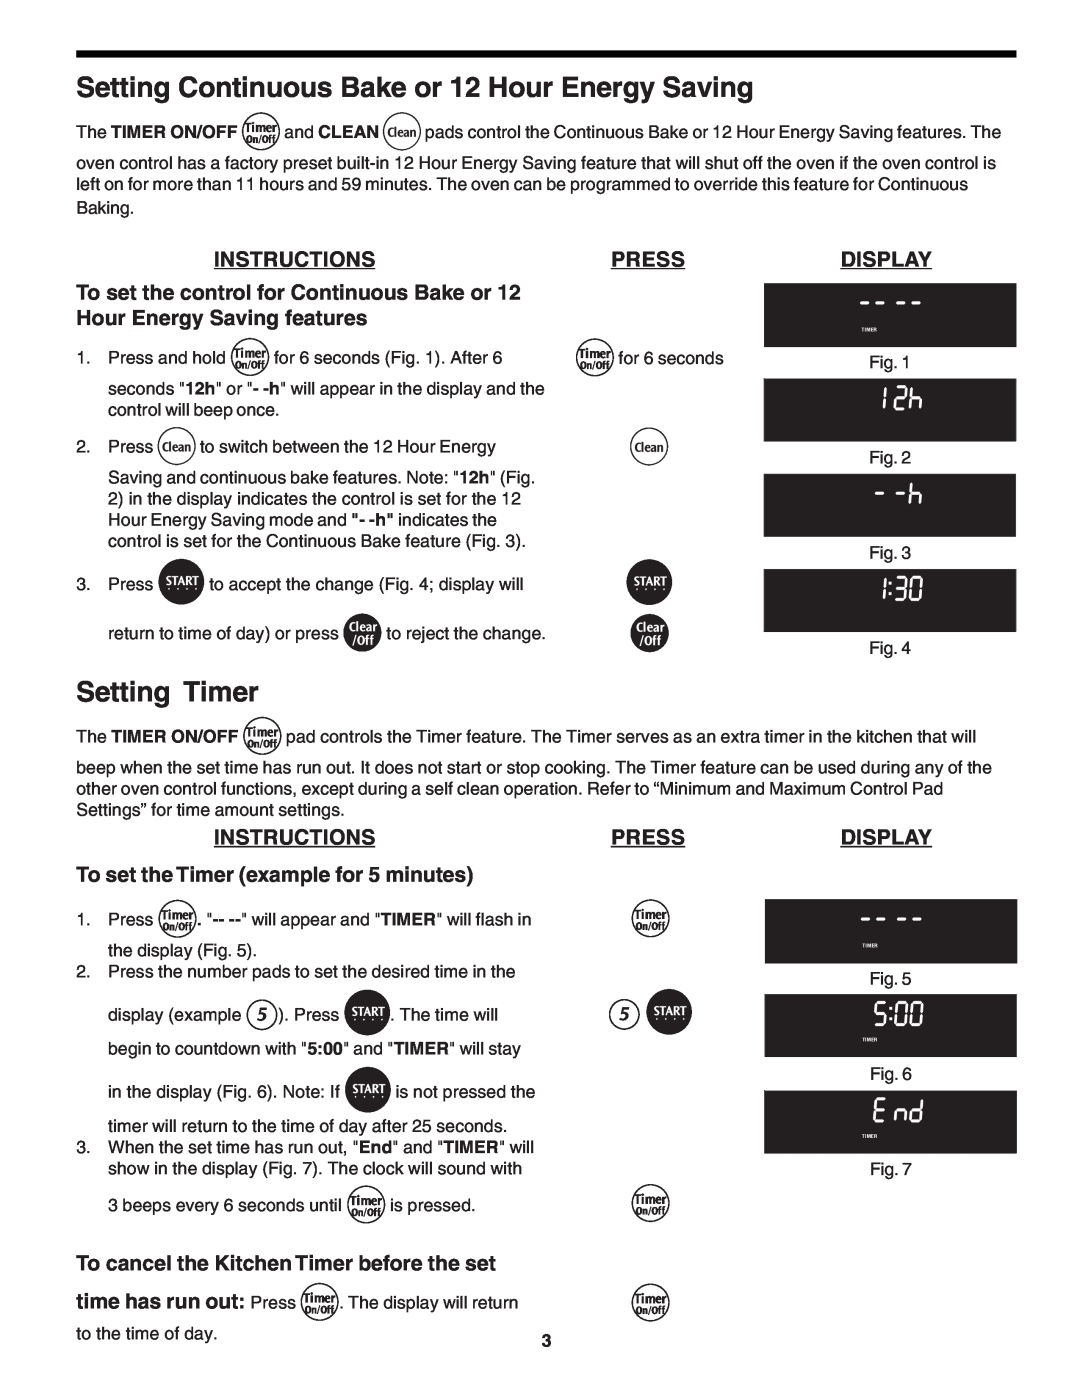 Frigidaire 318200138 (0610) Setting Continuous Bake or 12 Hour Energy Saving, Setting Timer, Instructions, Press, Display 